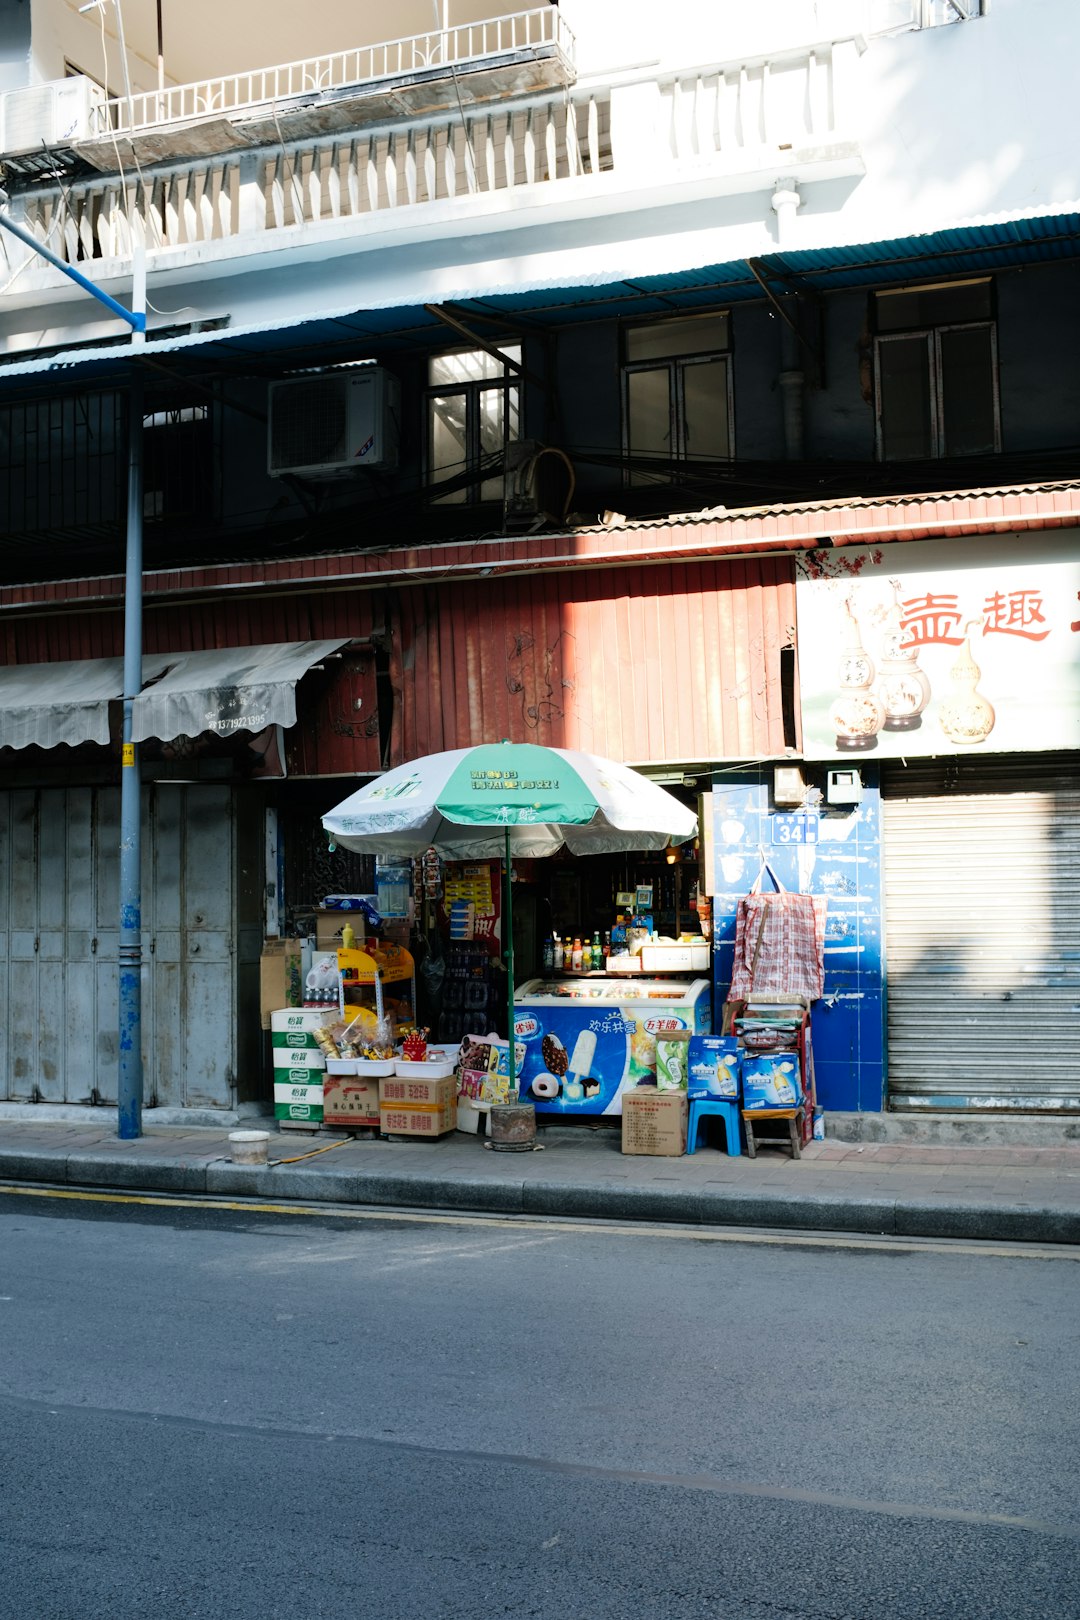 blue and white food stall beside store during daytime